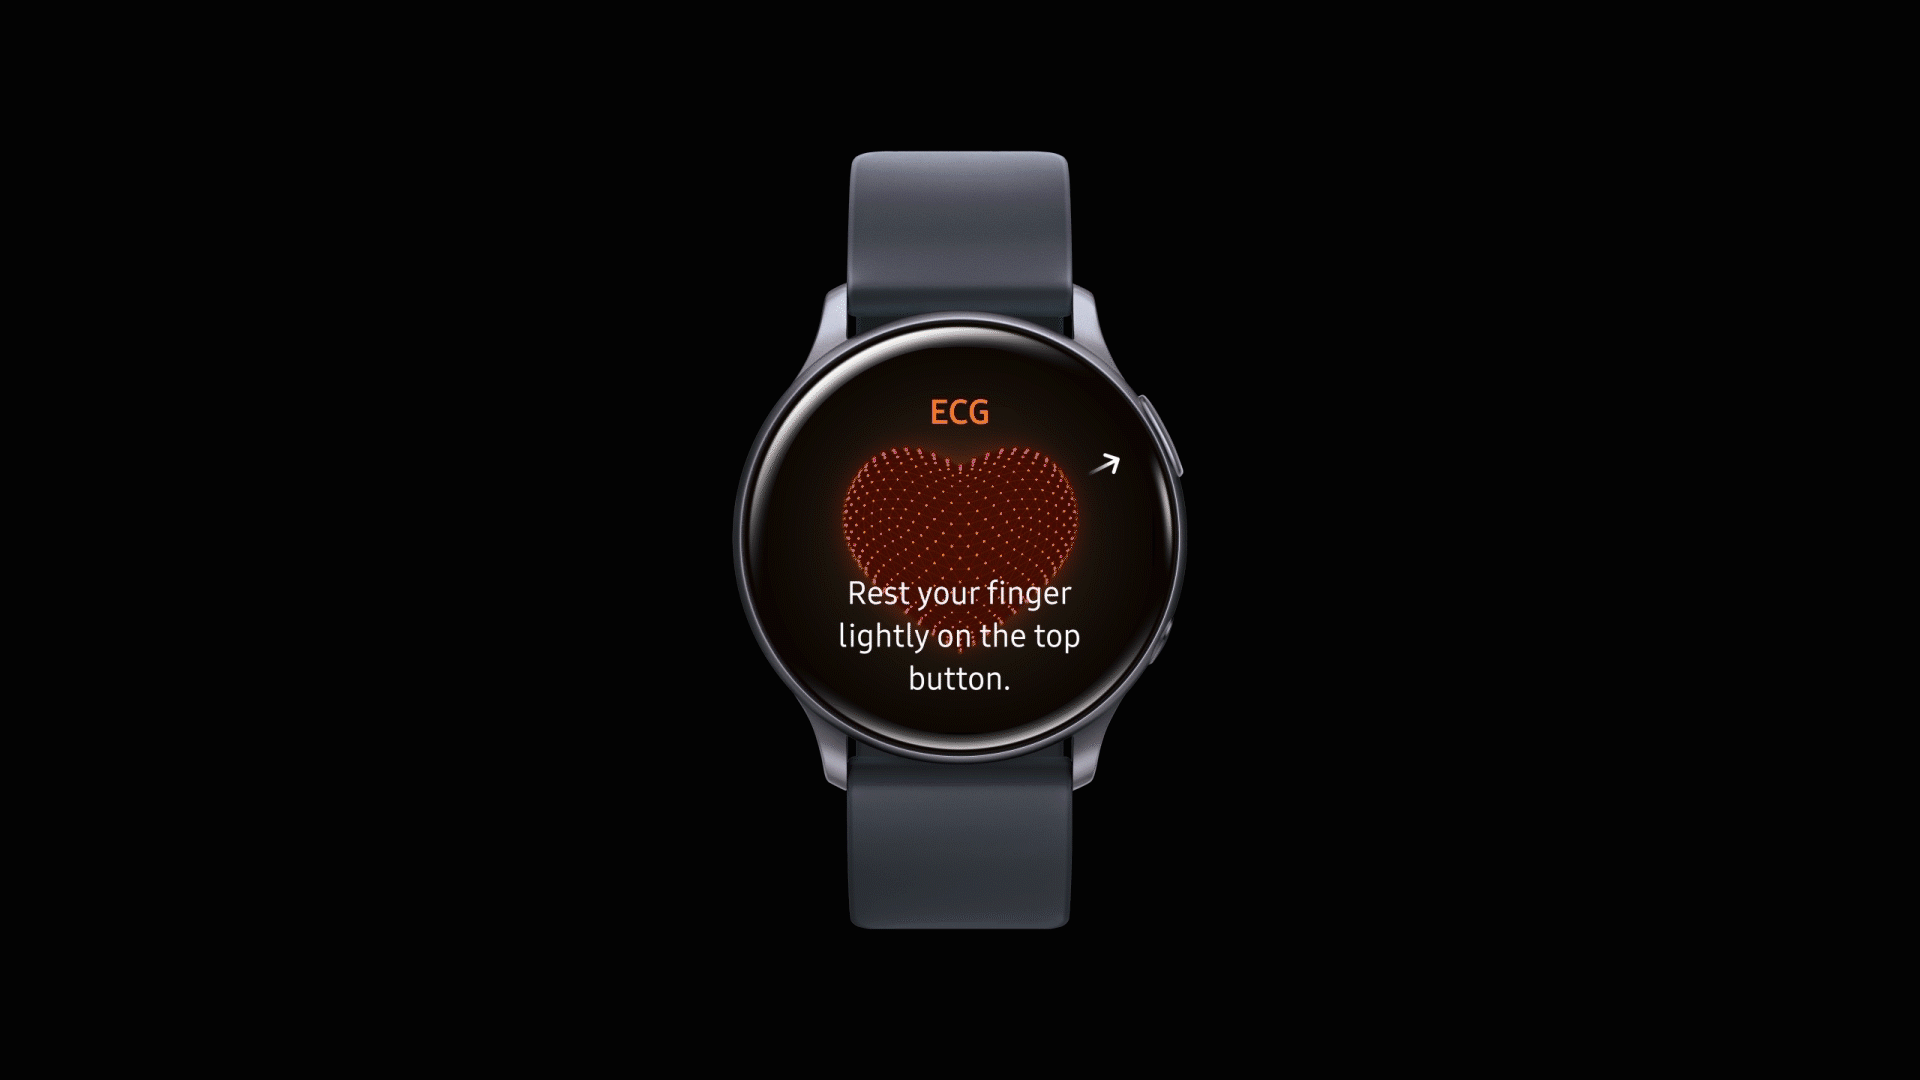 Electrocardiogram Monitoring Cleared for Galaxy Watch Active2 by South Korea’s Ministry of Food and Drug Safety